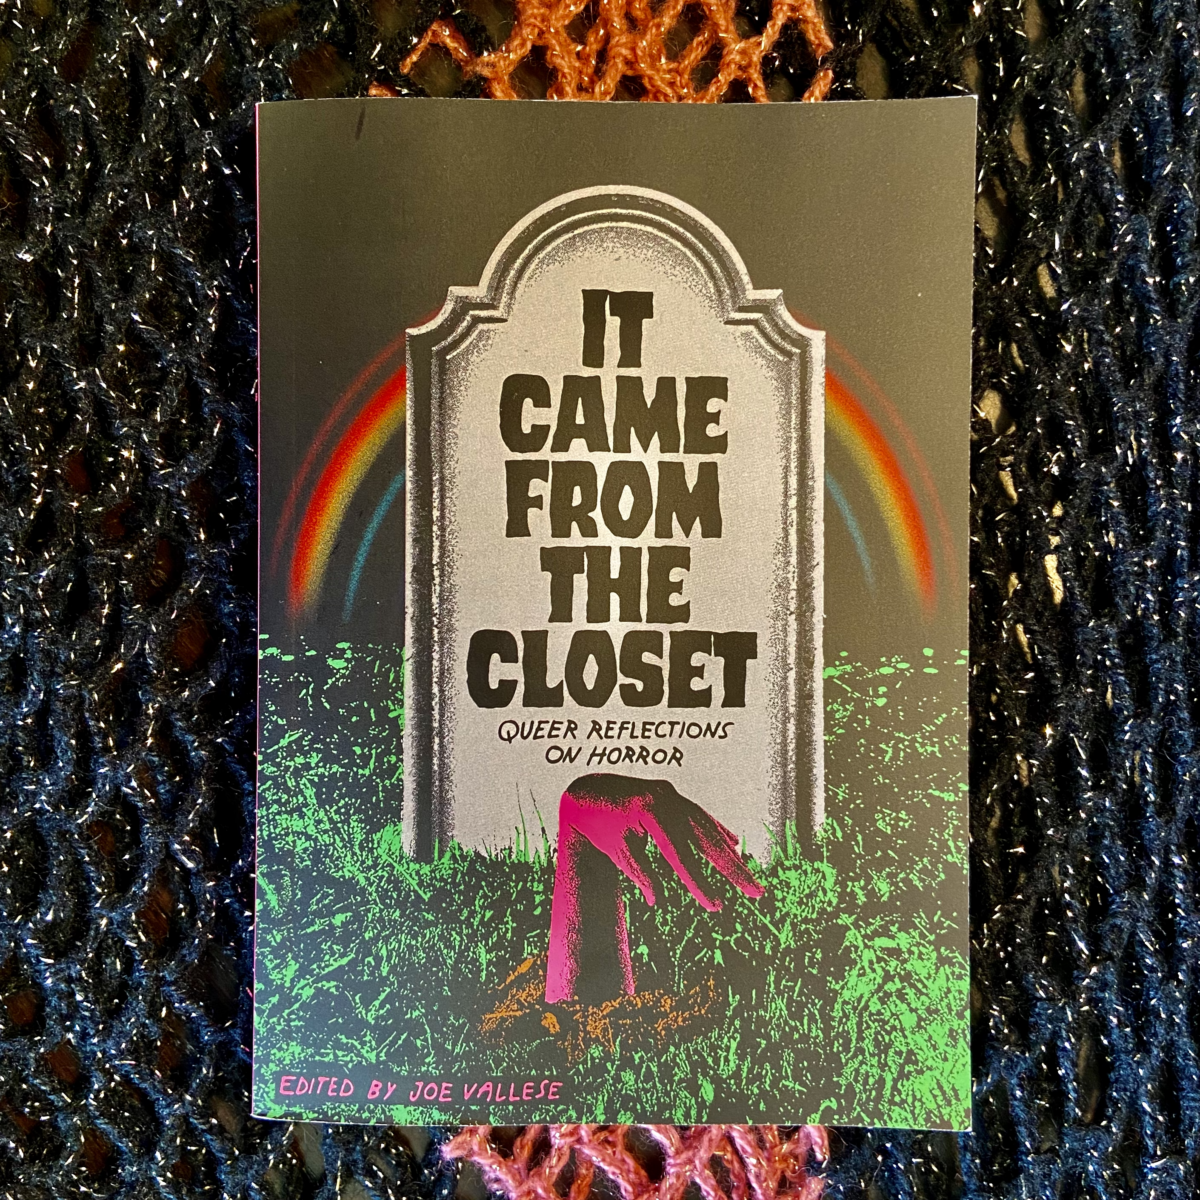 cover of "It Came from the Closet: Queer Reflections on Horror" edited by Joe Vallese